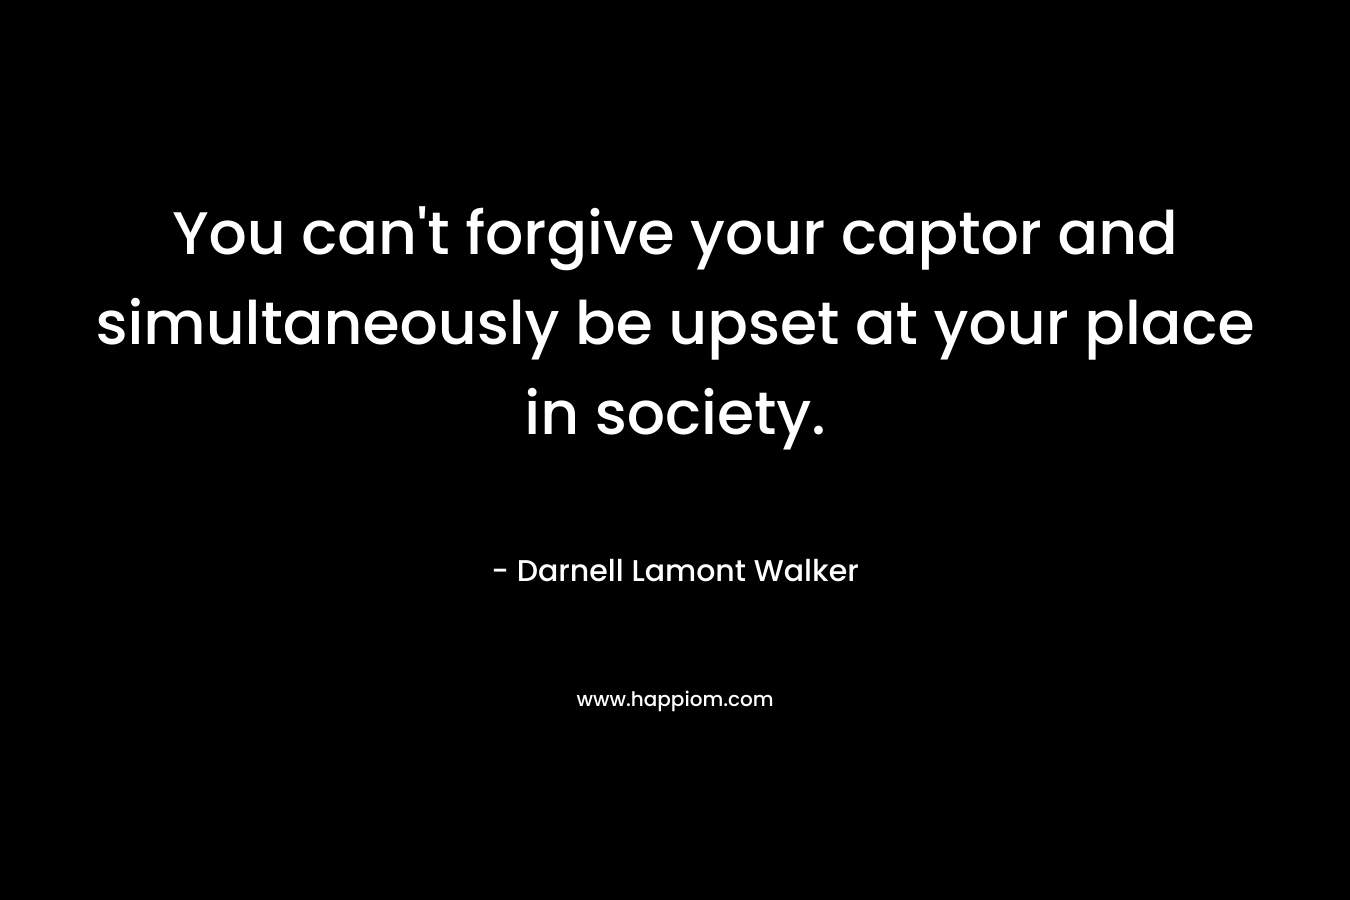 You can't forgive your captor and simultaneously be upset at your place in society.